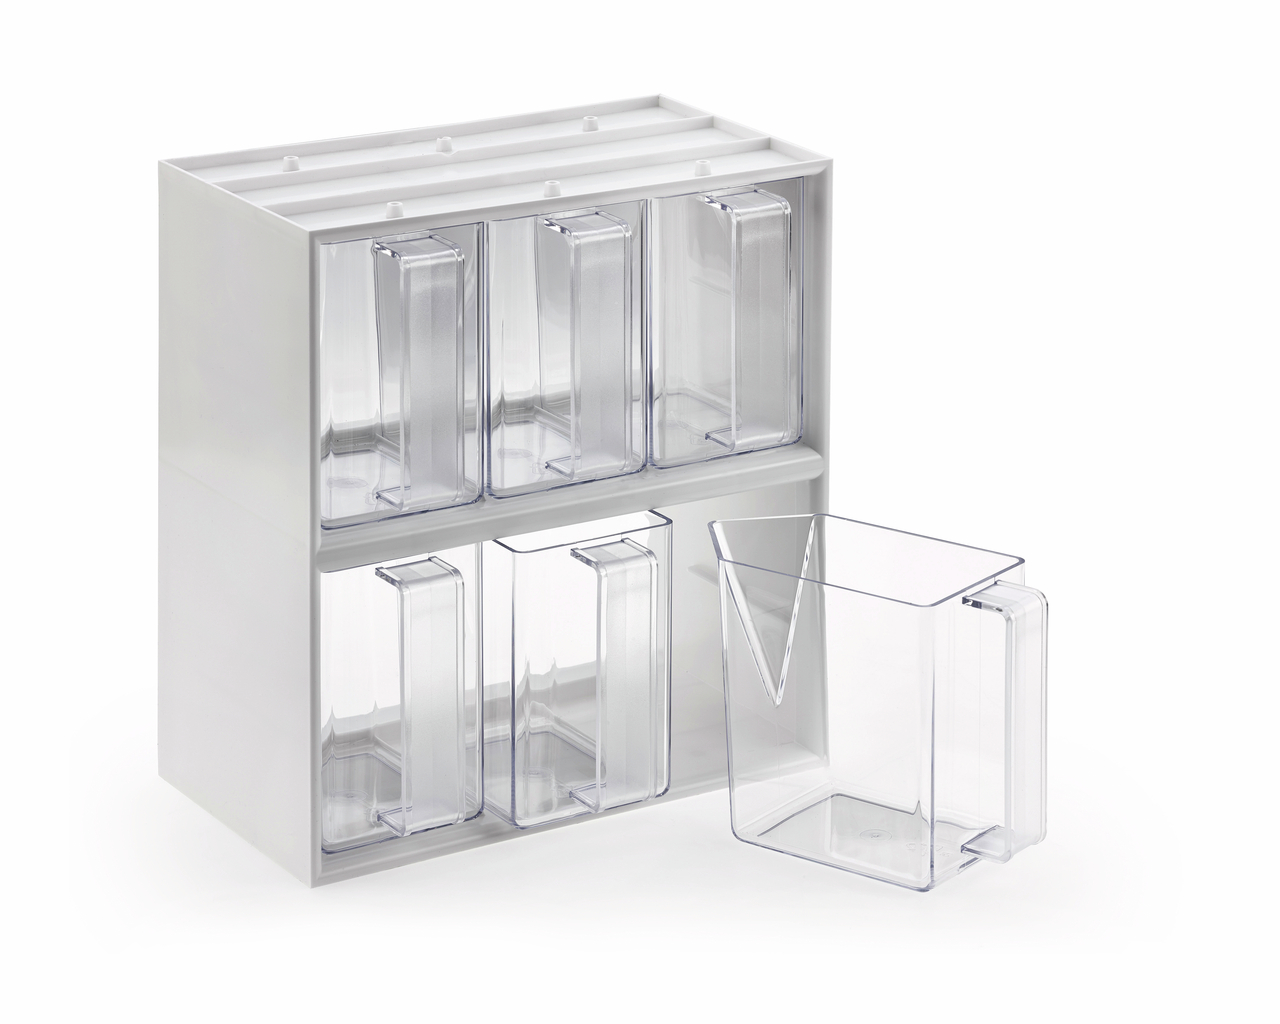  De Luxe 6, drawer containers crystal clear